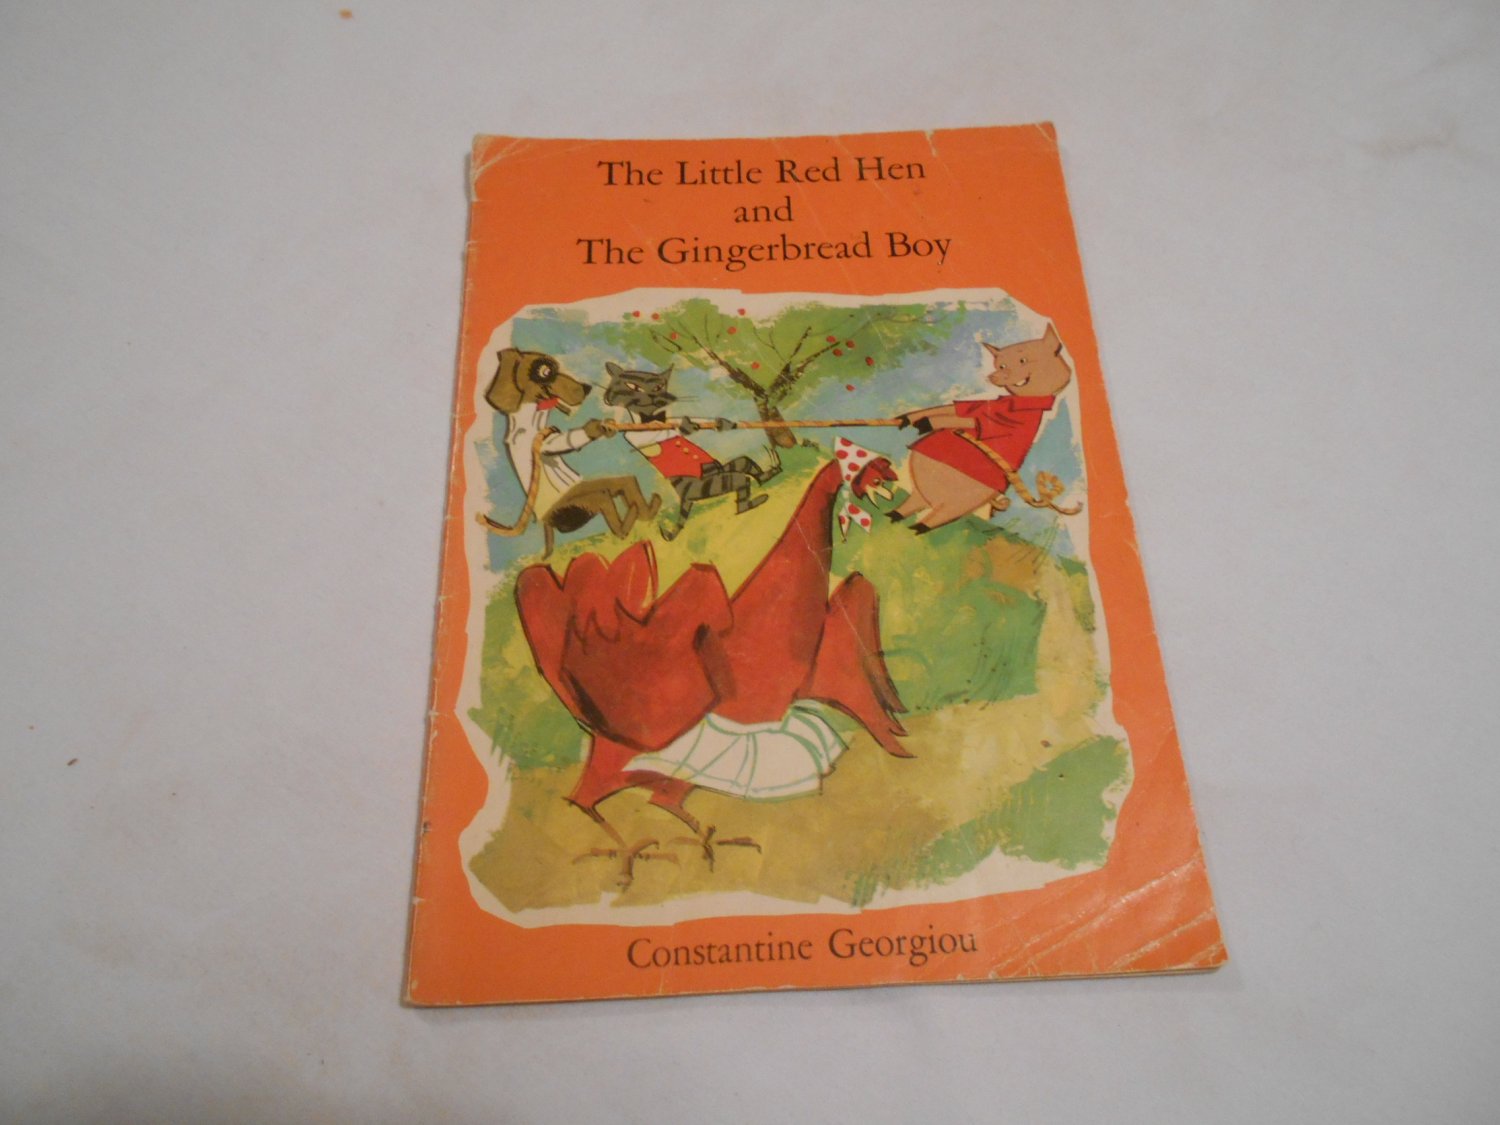 The Little Red Hen and The Gingerbread Boy by Constantine Georgiou (1963) (WC4)1500 x 1125